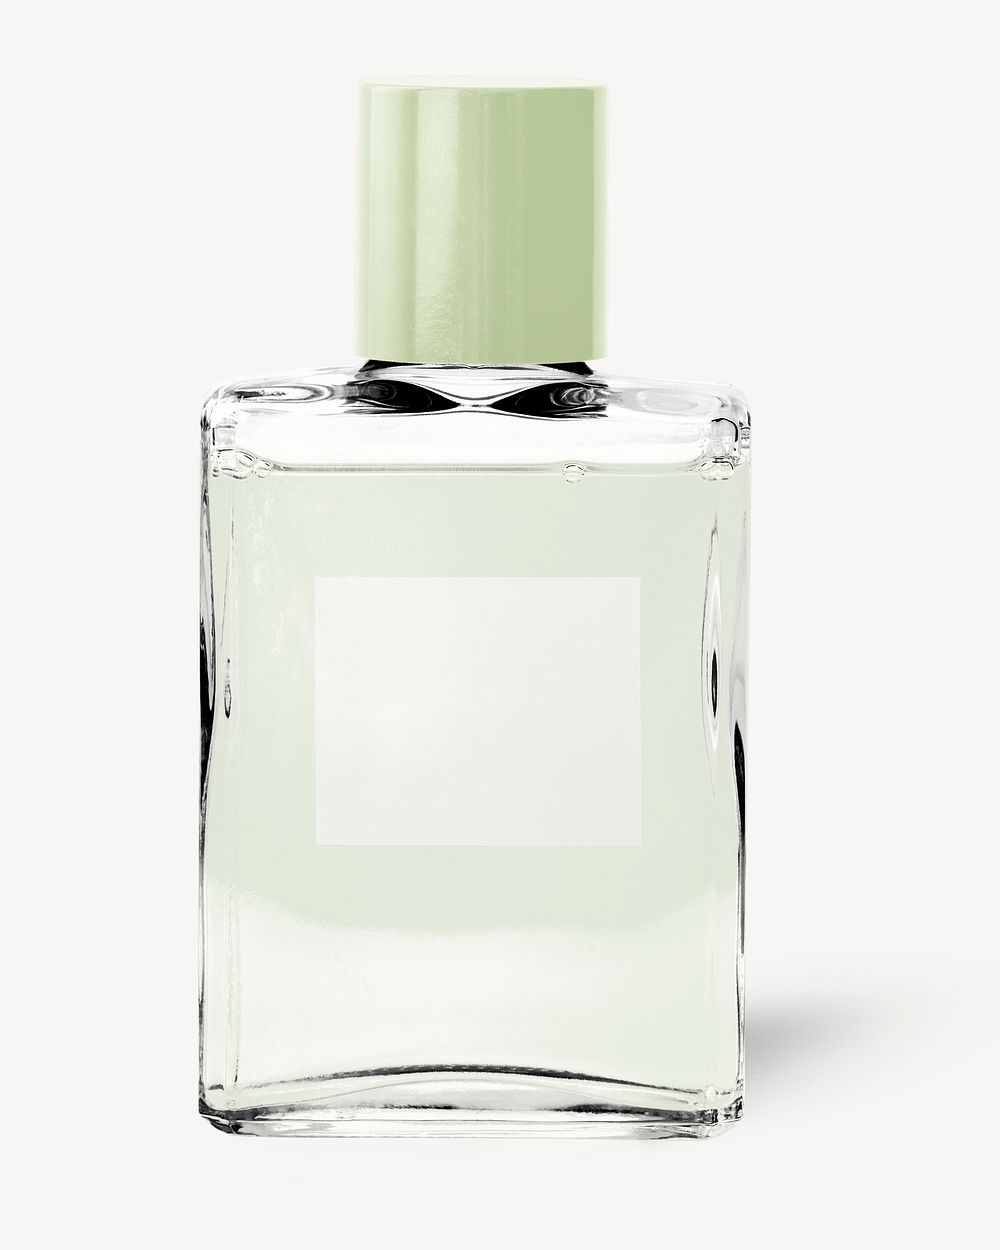 Square glass perfume bottle with blank label